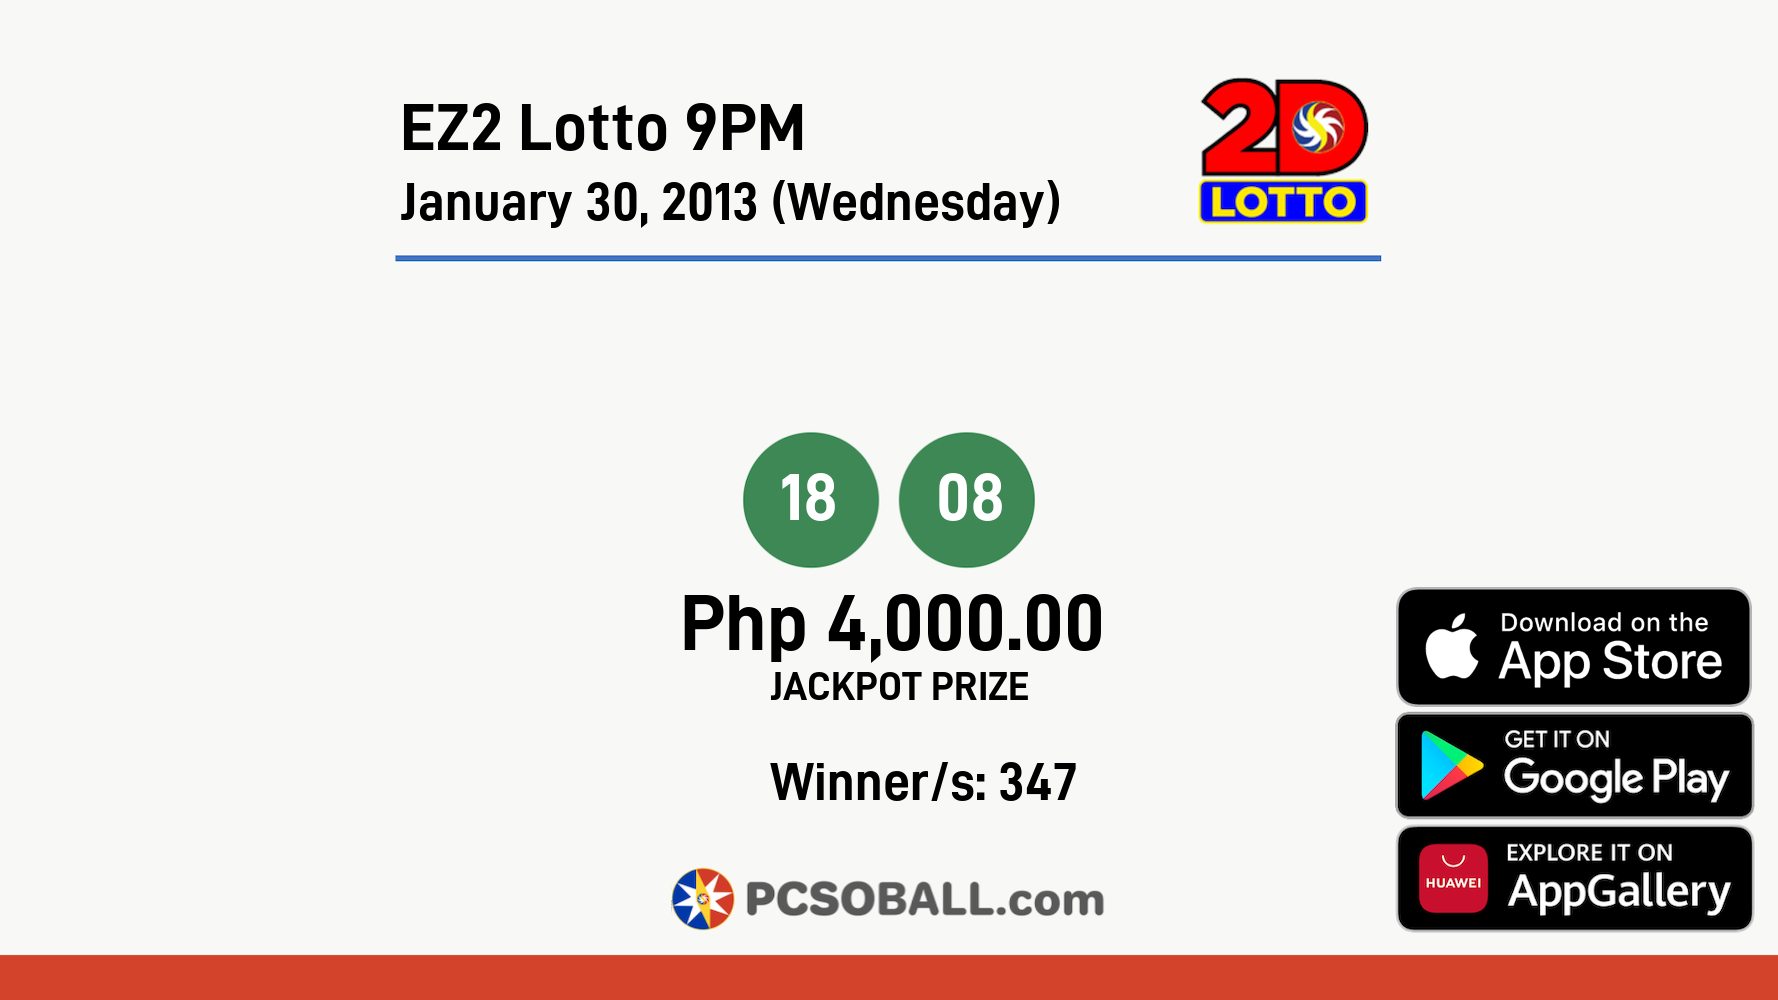 EZ2 Lotto 9PM January 30, 2013 (Wednesday) Result